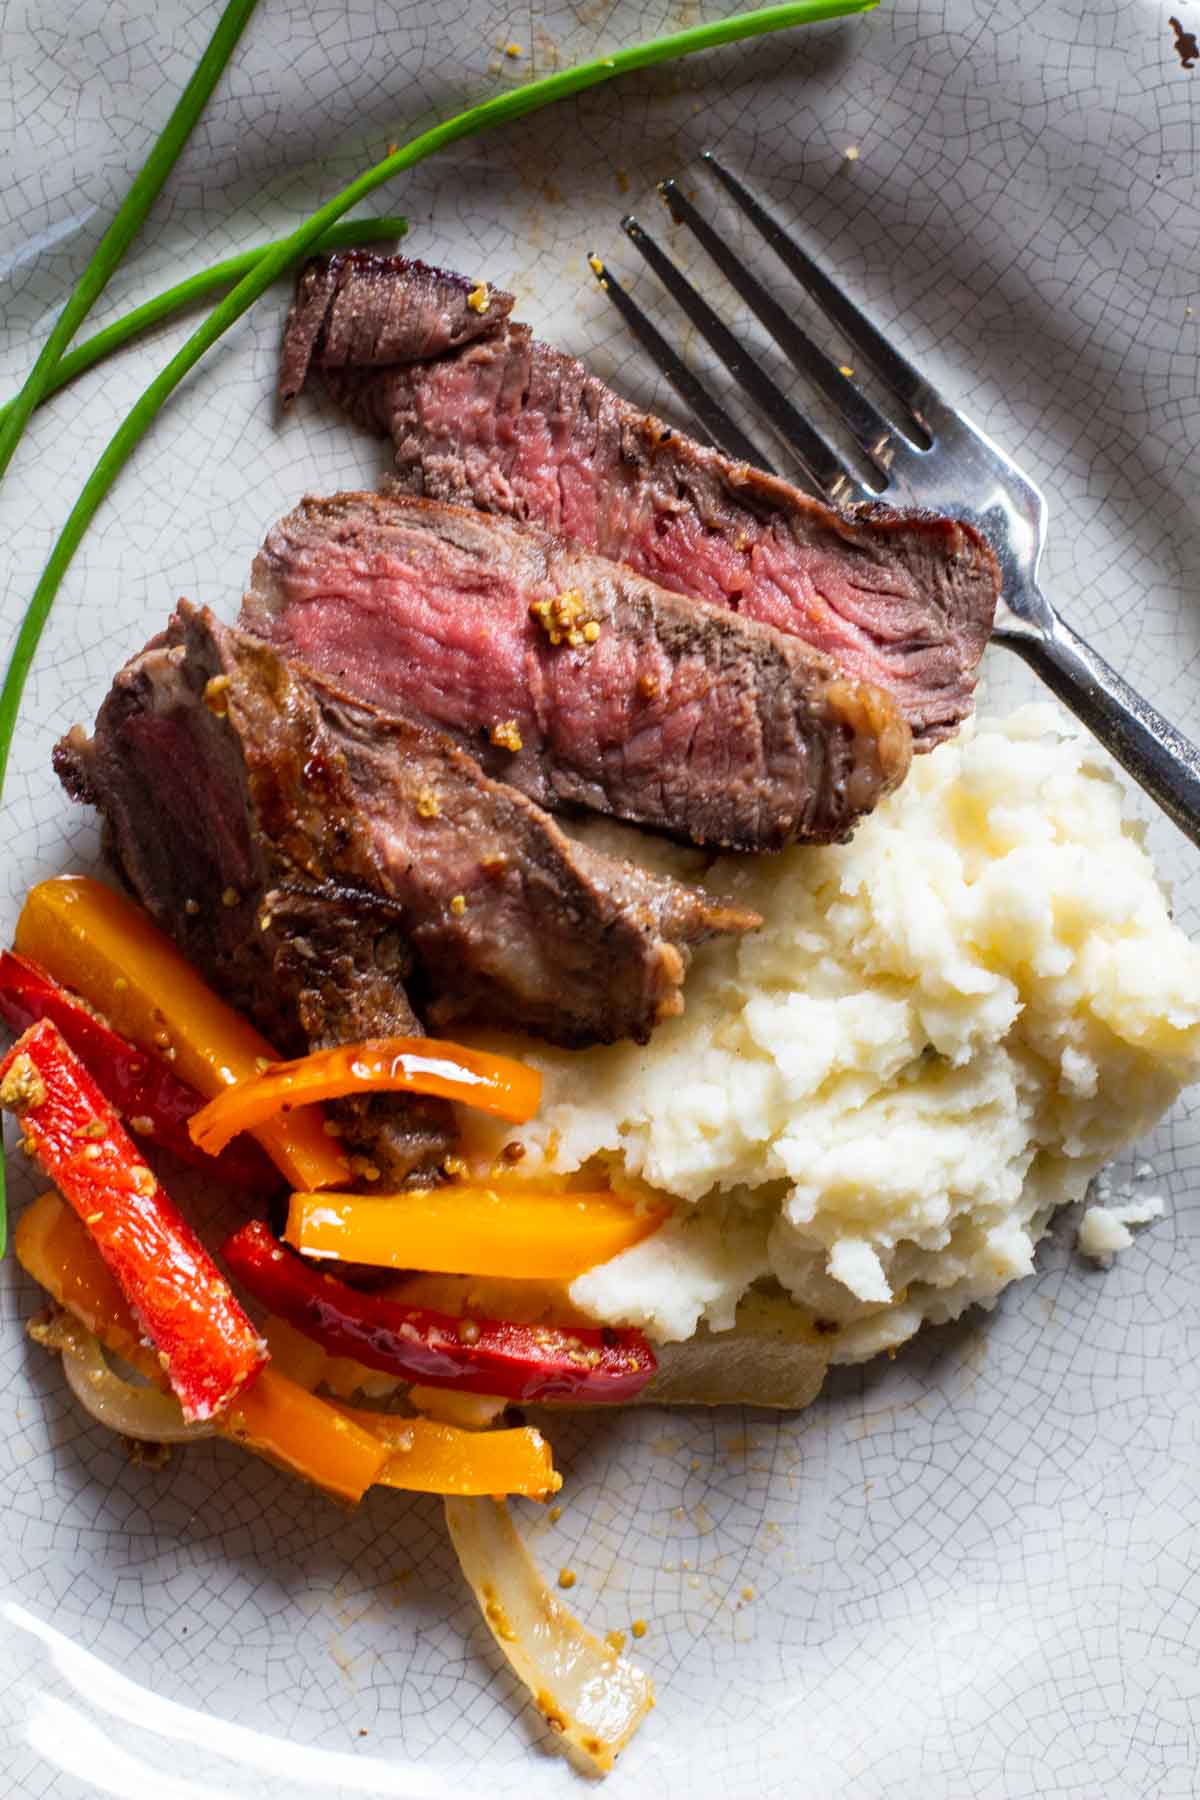 Bison steak recipe served with mashed potatoes and sauteed red and orange bell peppers.